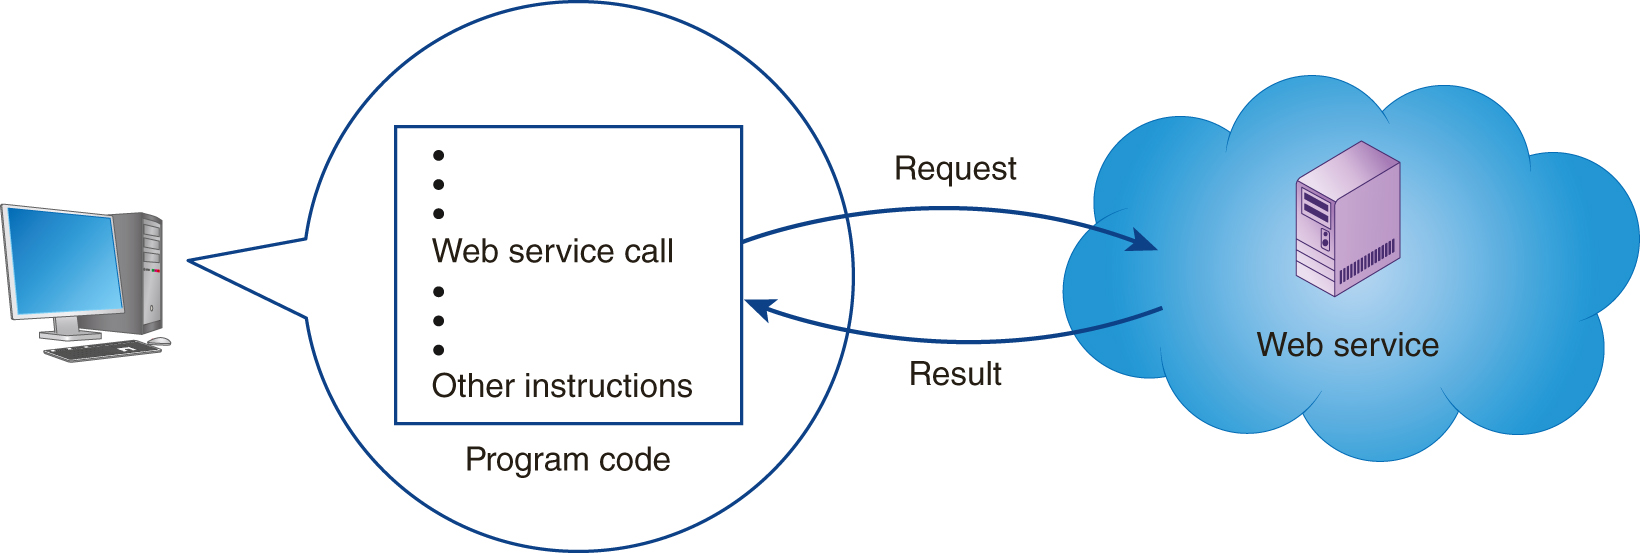 A user makes a web service call in a program code with other instructions and sends the request to a web service in a cloud, which returns the result back to the user.